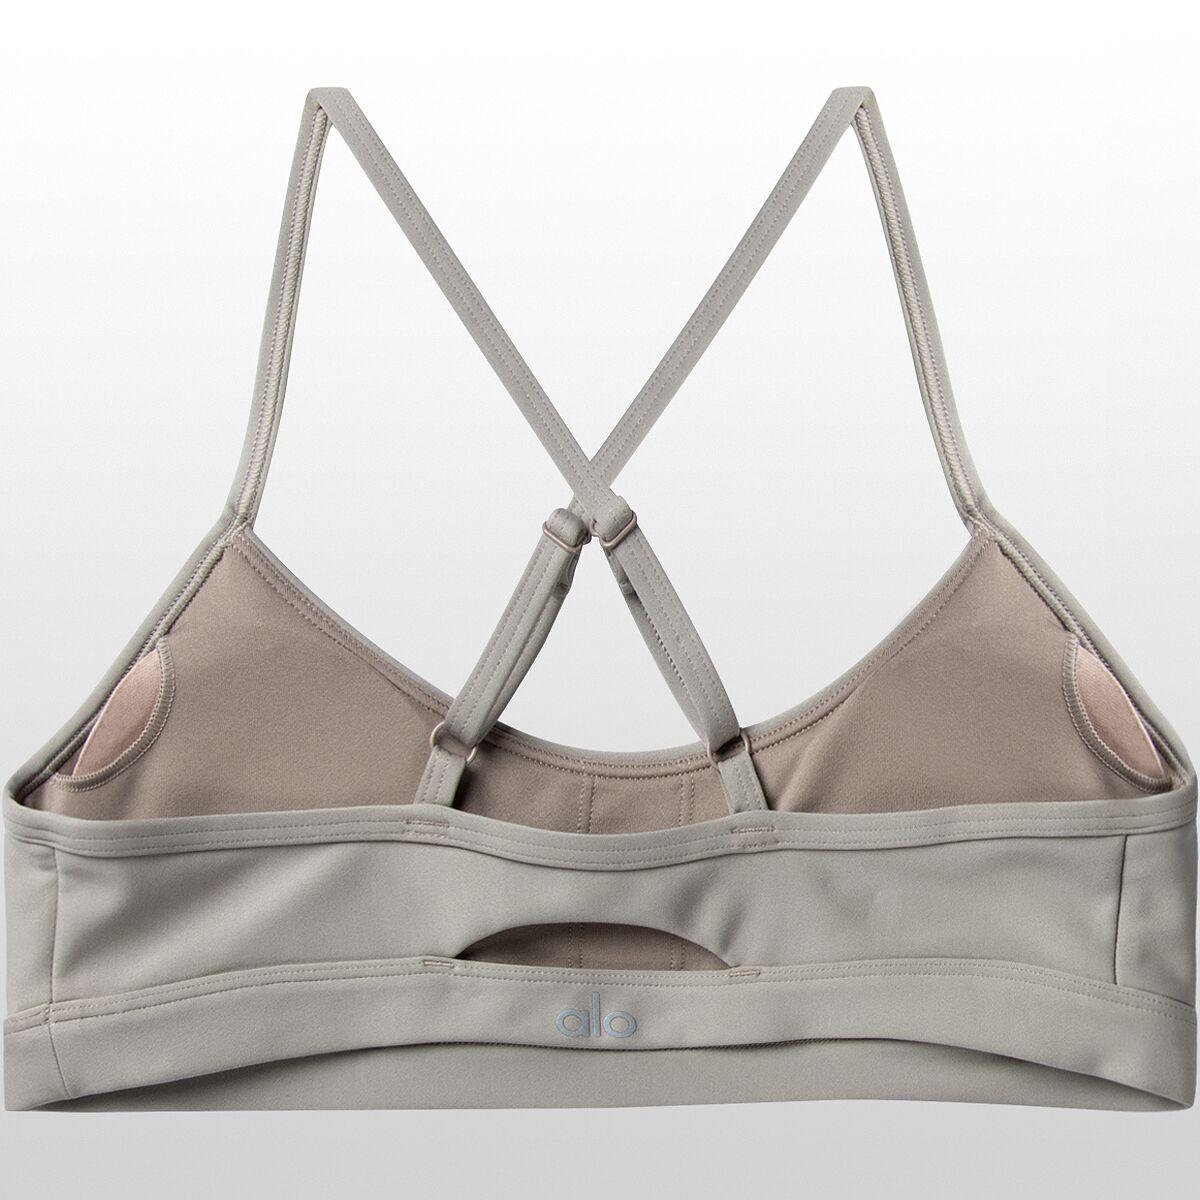 alo Airlift Intrigue Bra in Gravel